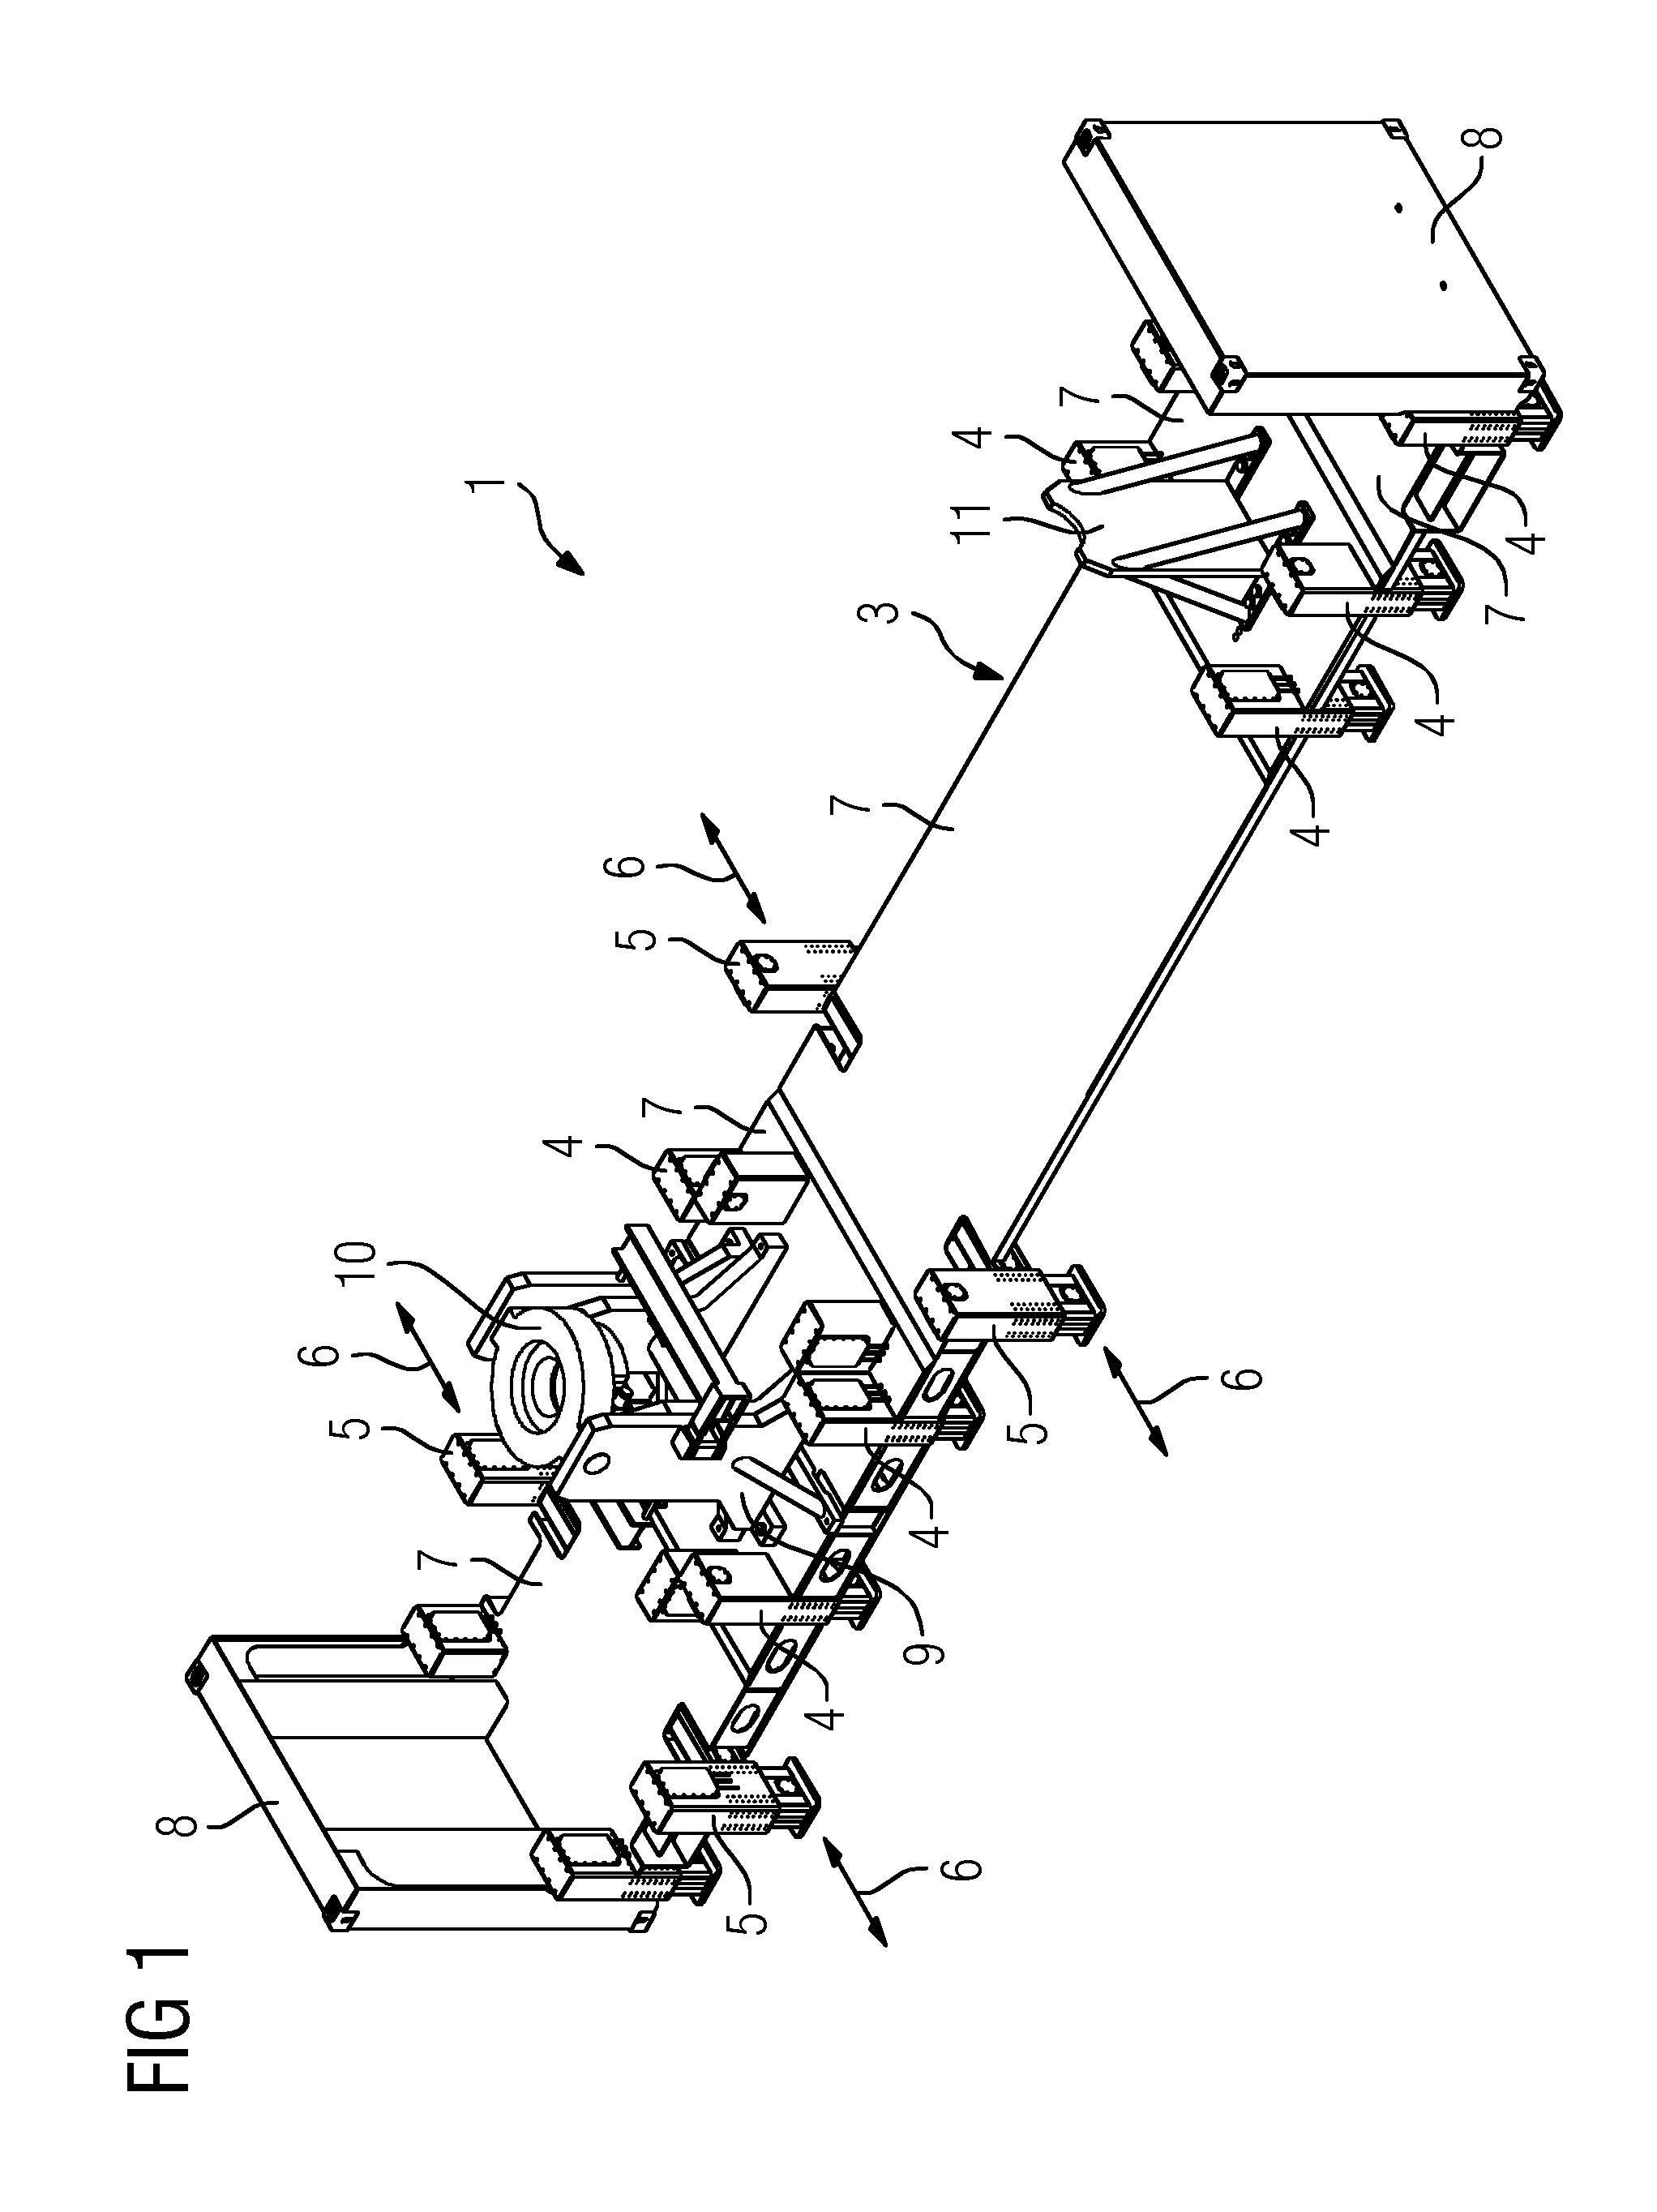 Rotor pivoting system